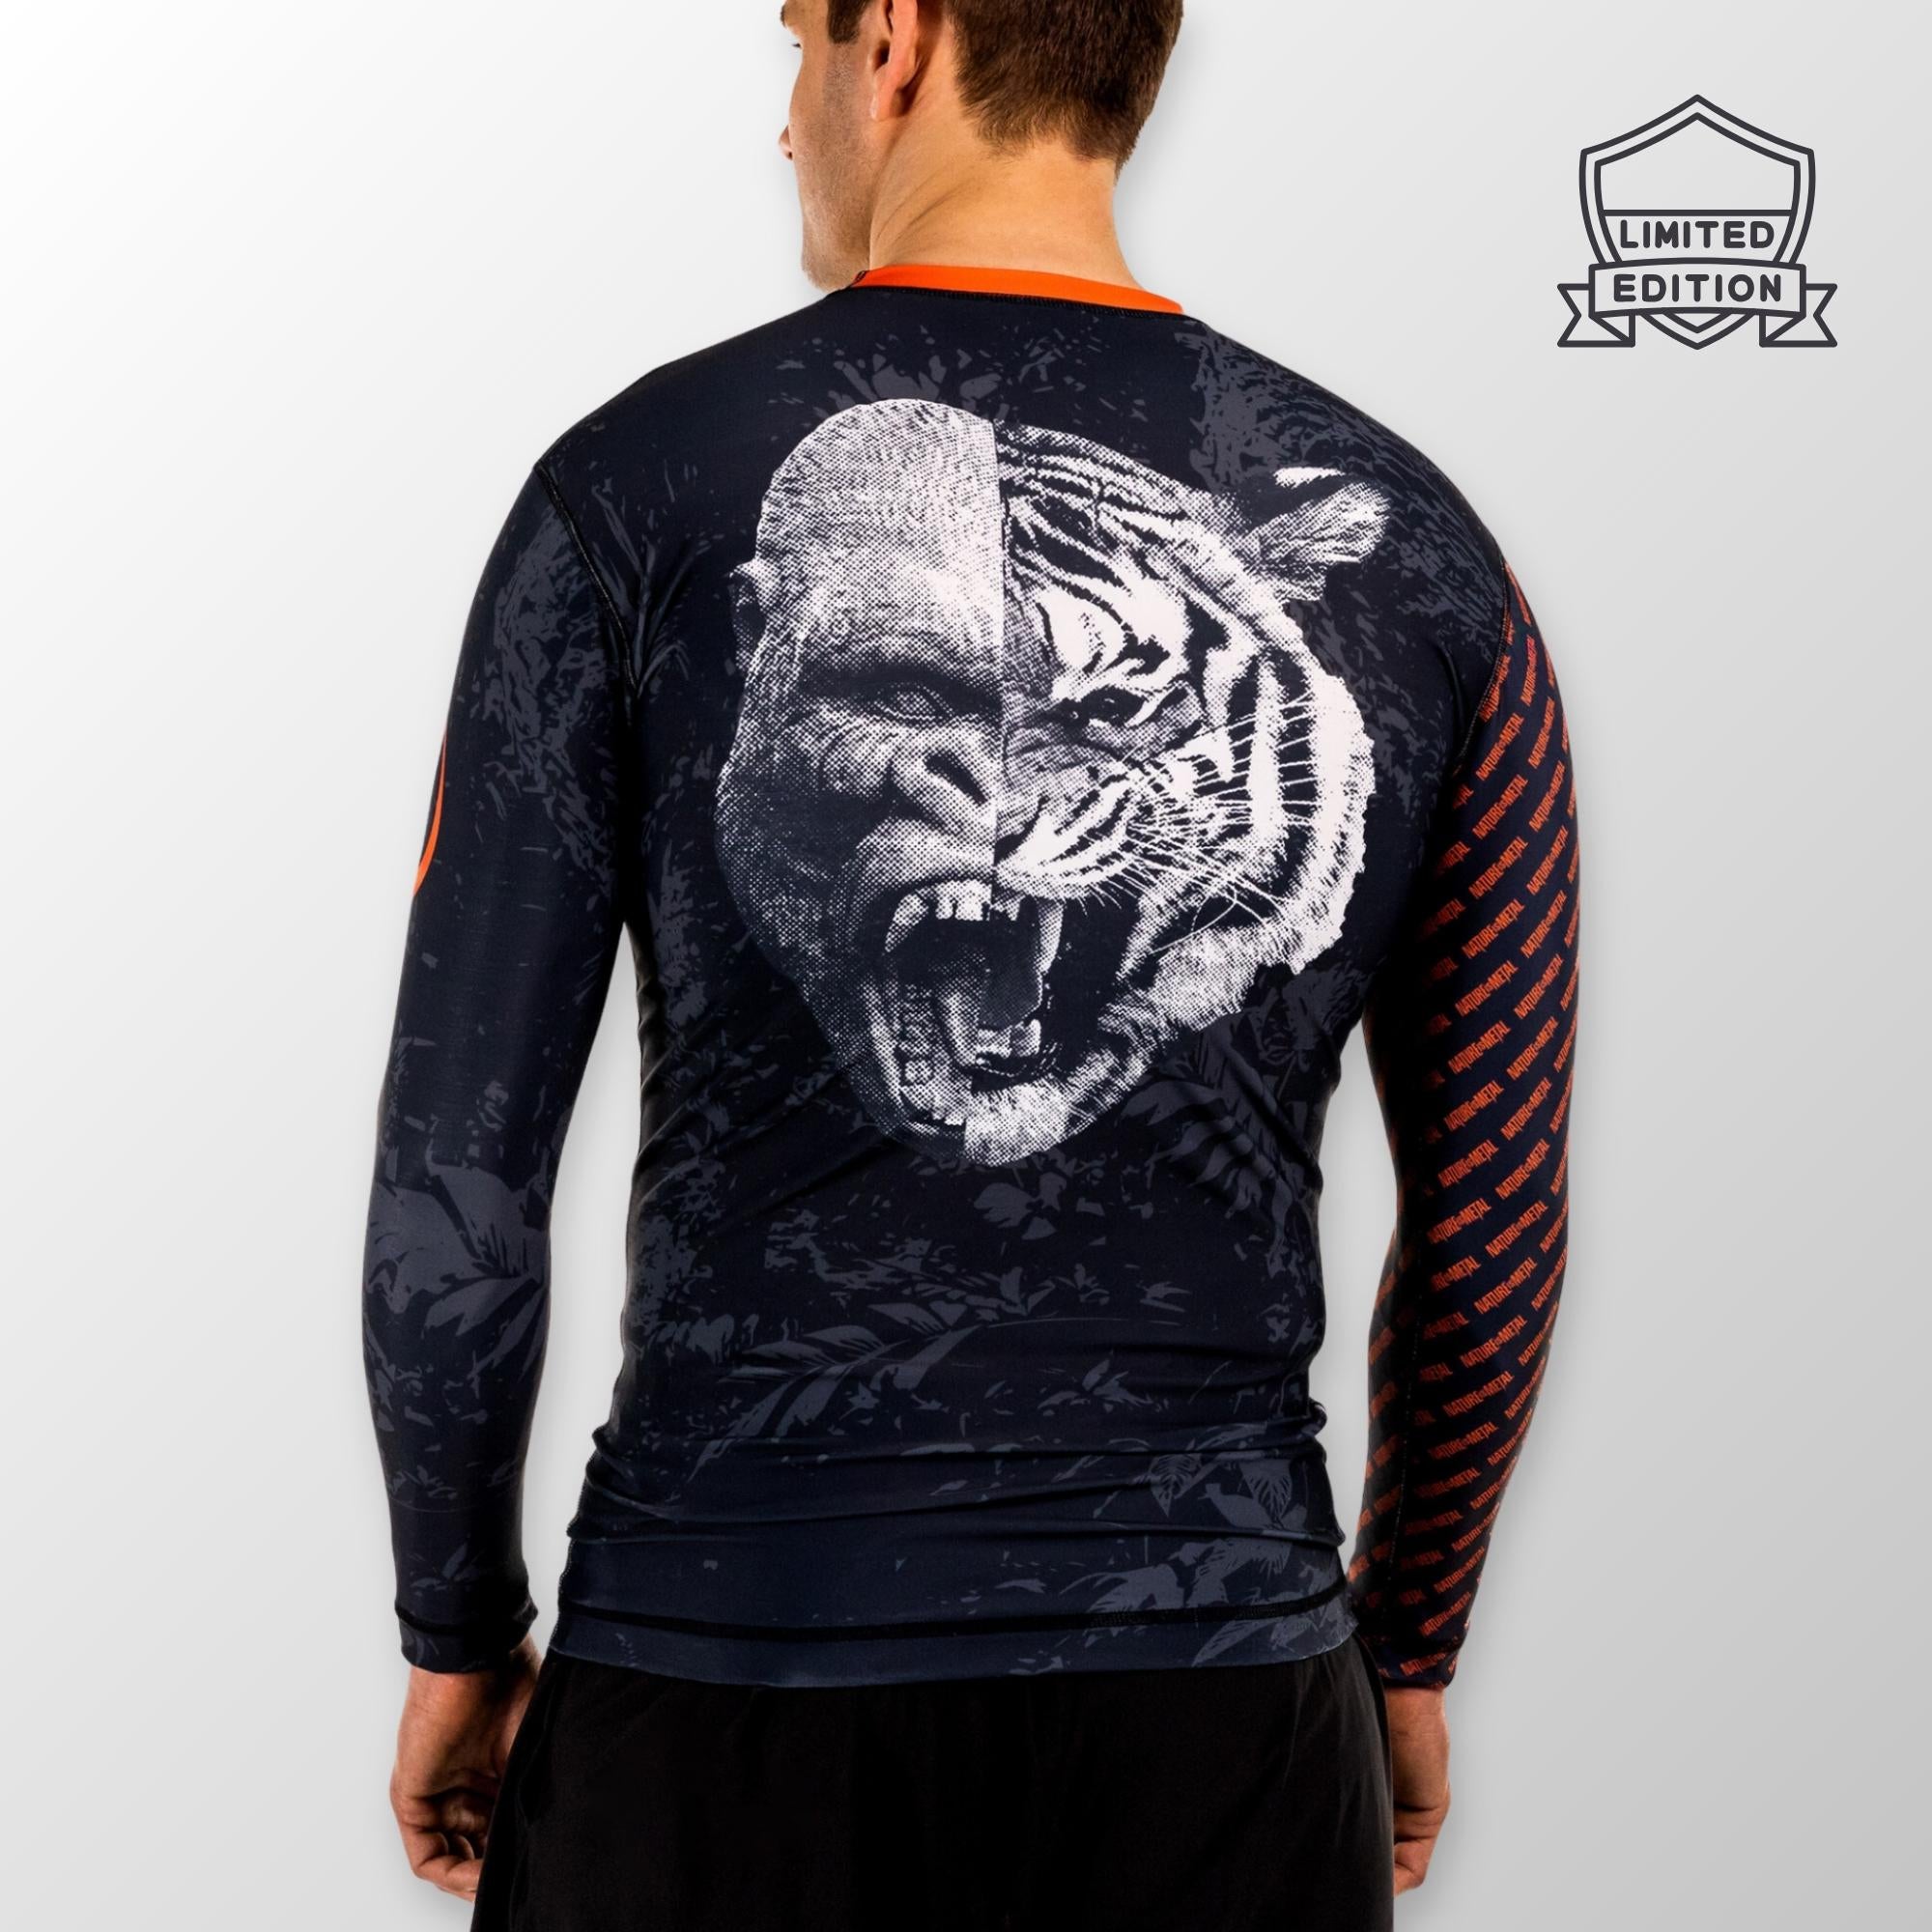 Nature is Metal x Origin - Fangs Out Rashguard - Compression Fit Long Sleeve